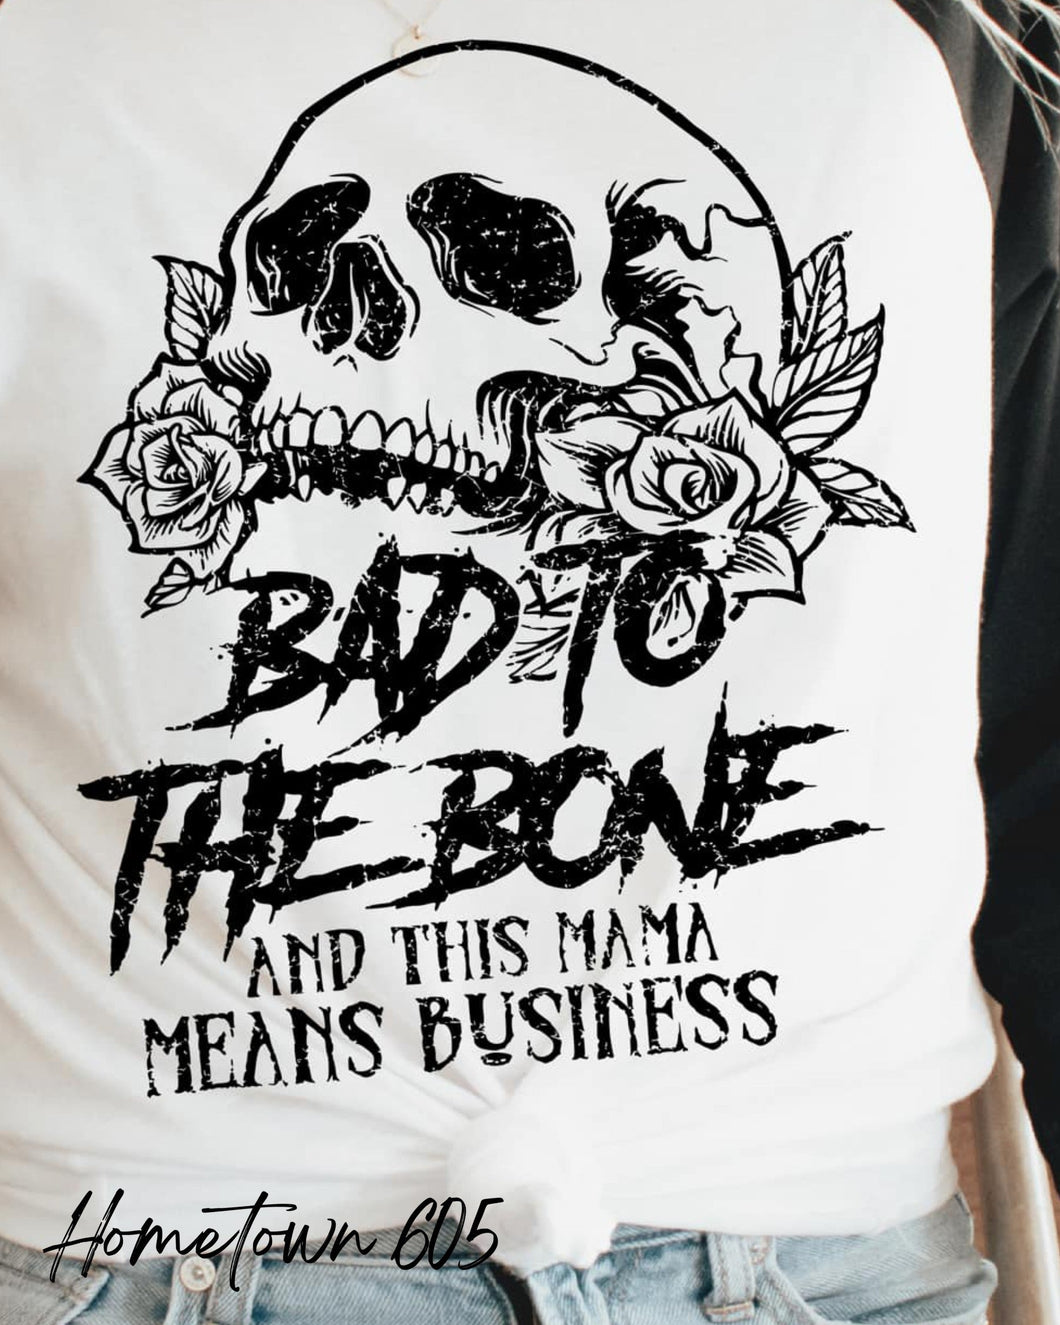 Bad to the bone and this mama means business t-shirt, graphic tee